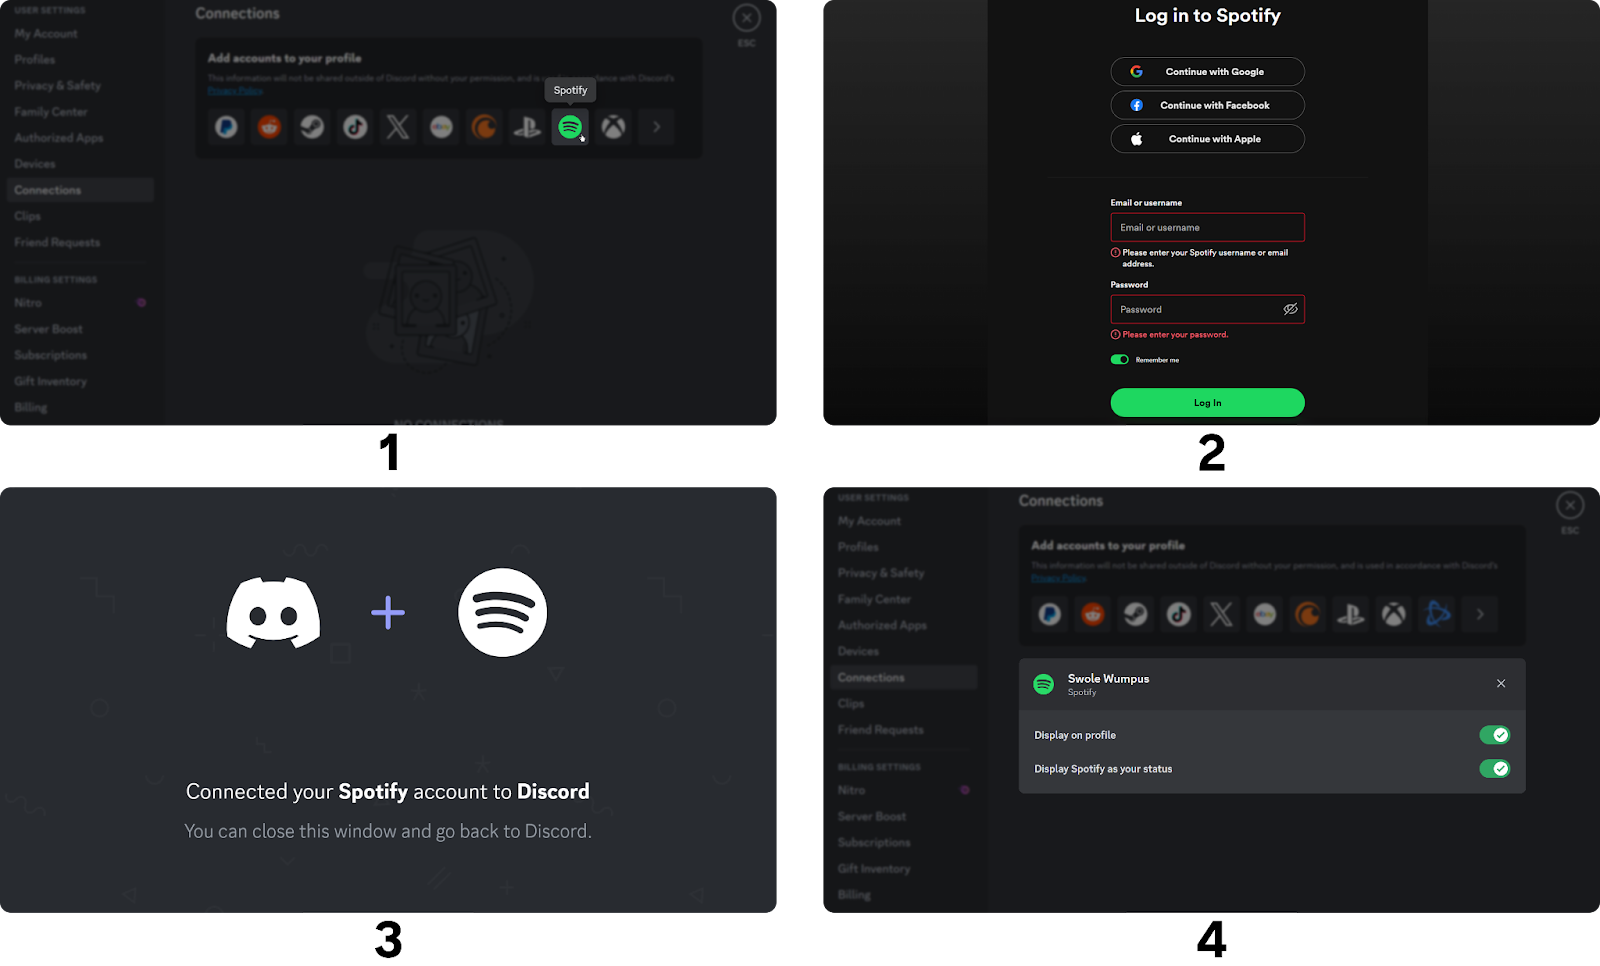 Steps of connecting a Spotify account to a Discord account on desktop